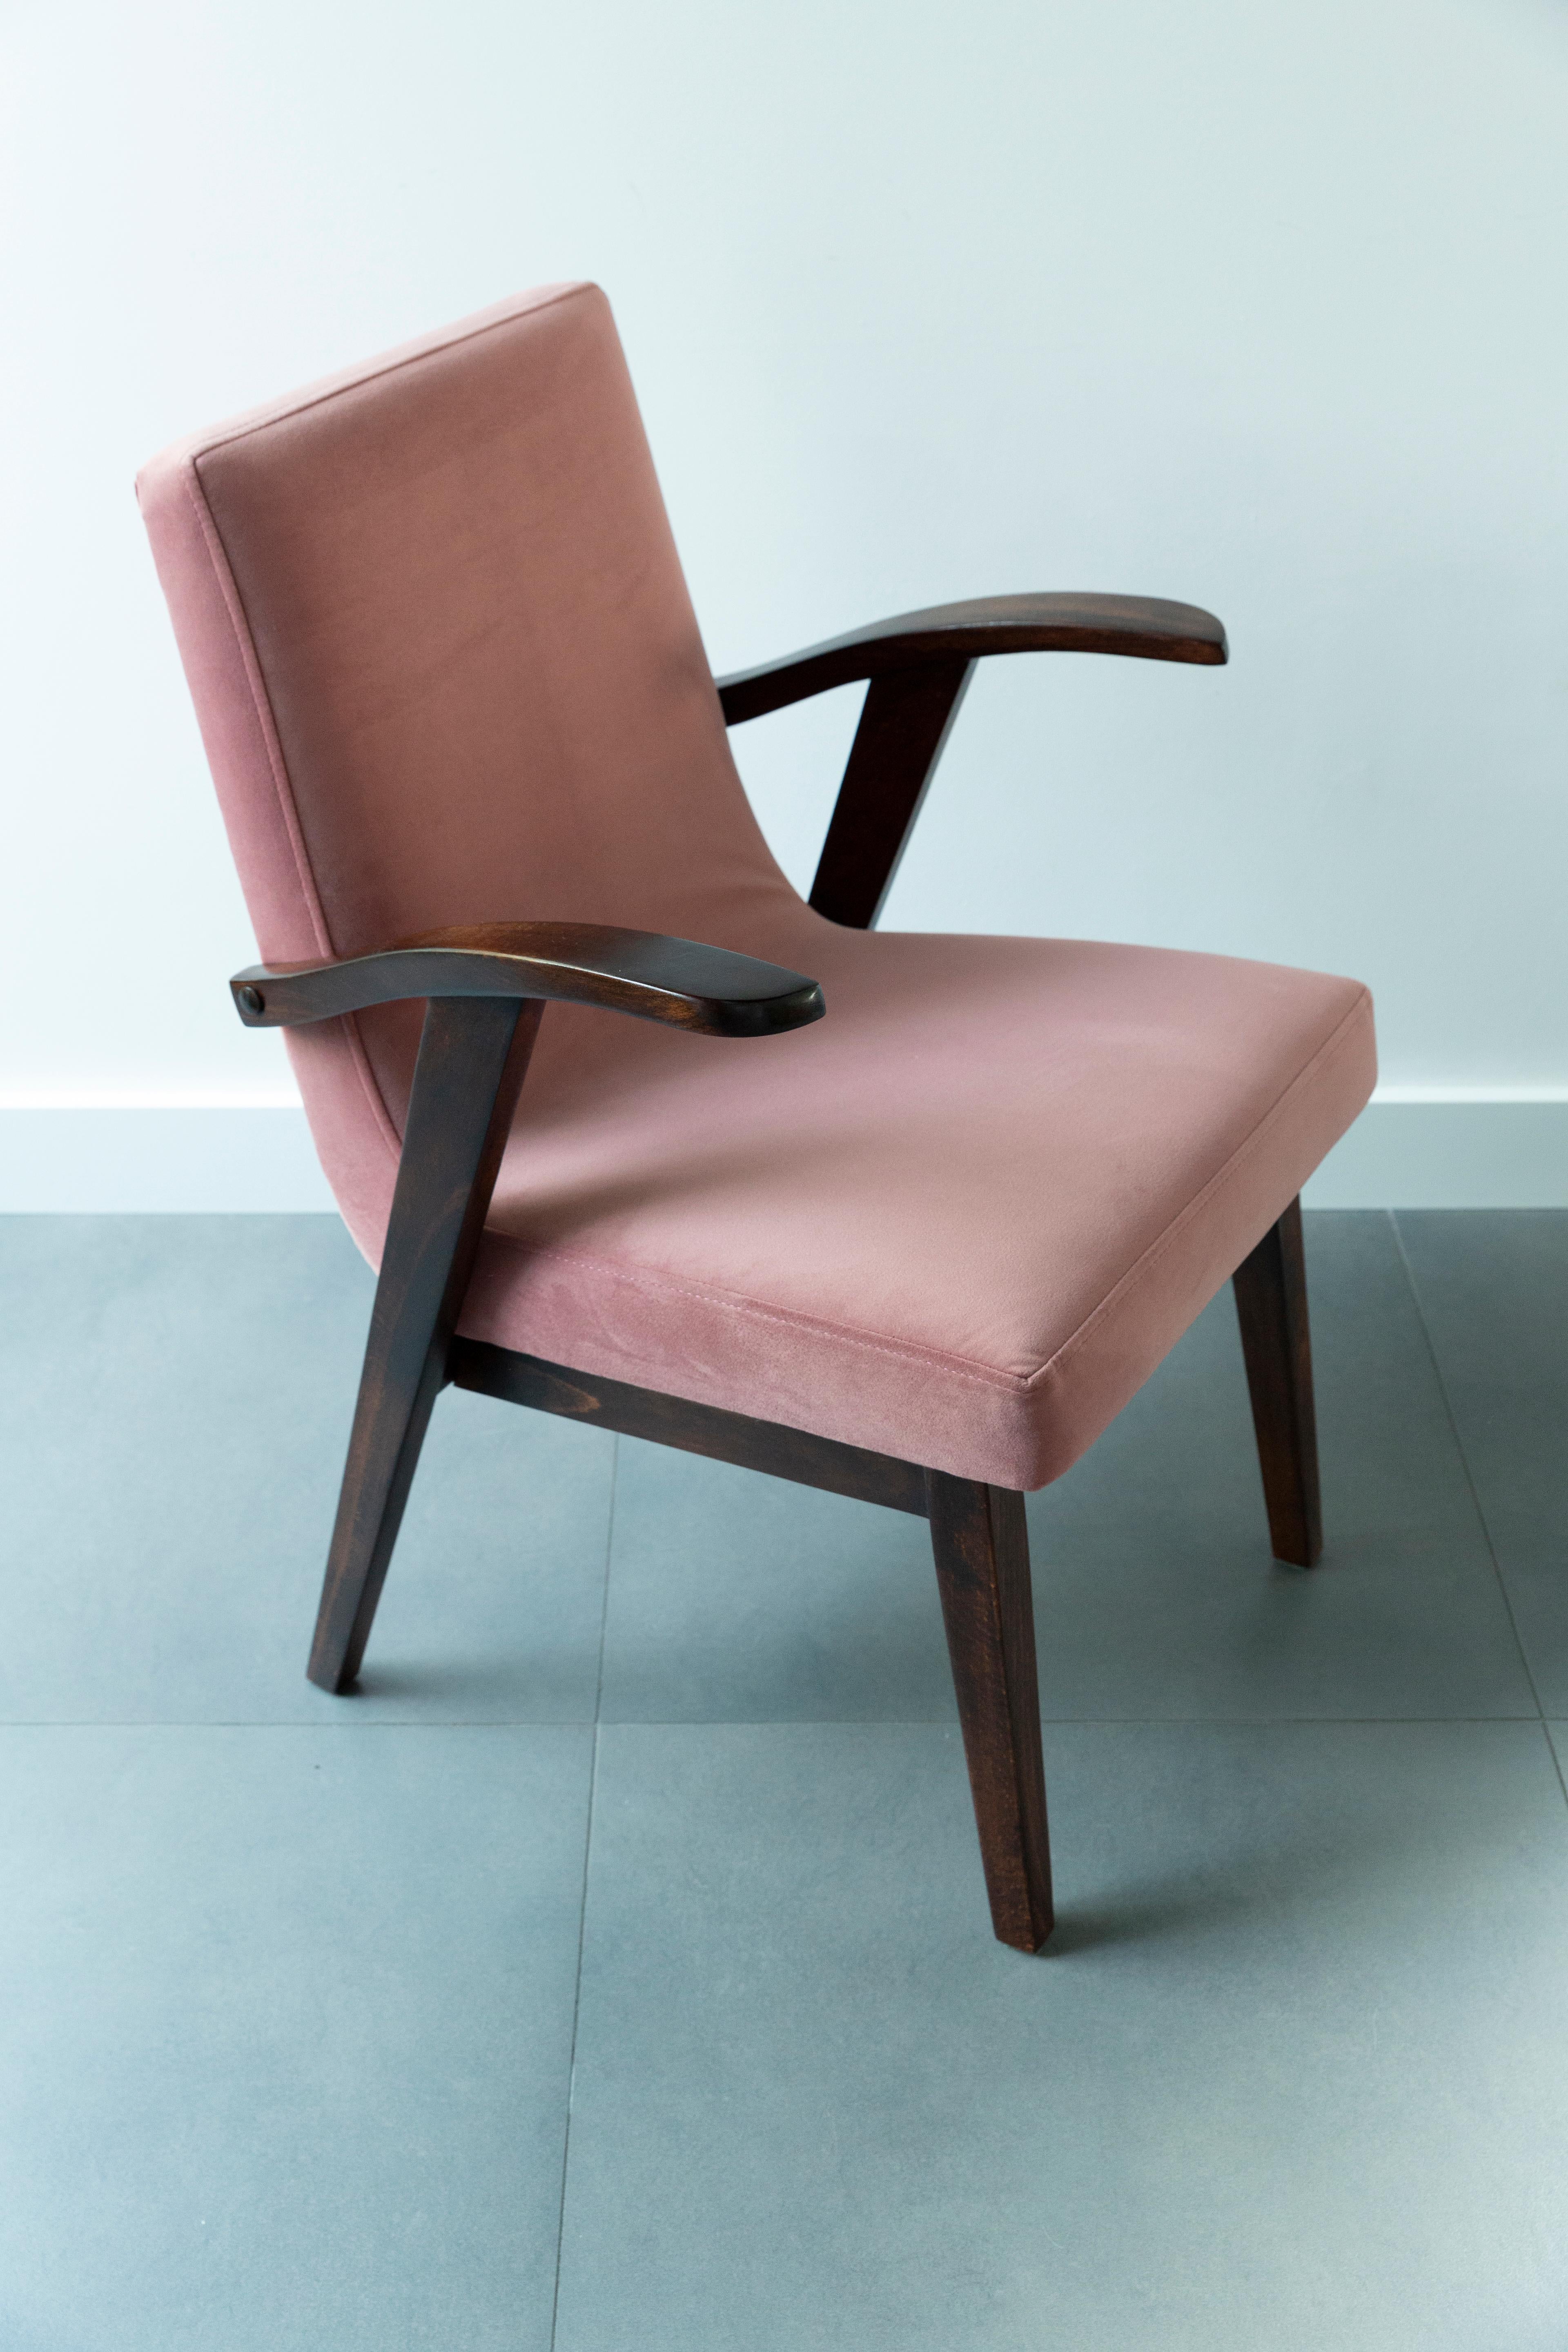 Polish Twelve 20th Century Armchairs in Dusty Pink Velvet by Mieczyslaw Puchala, 1960s For Sale